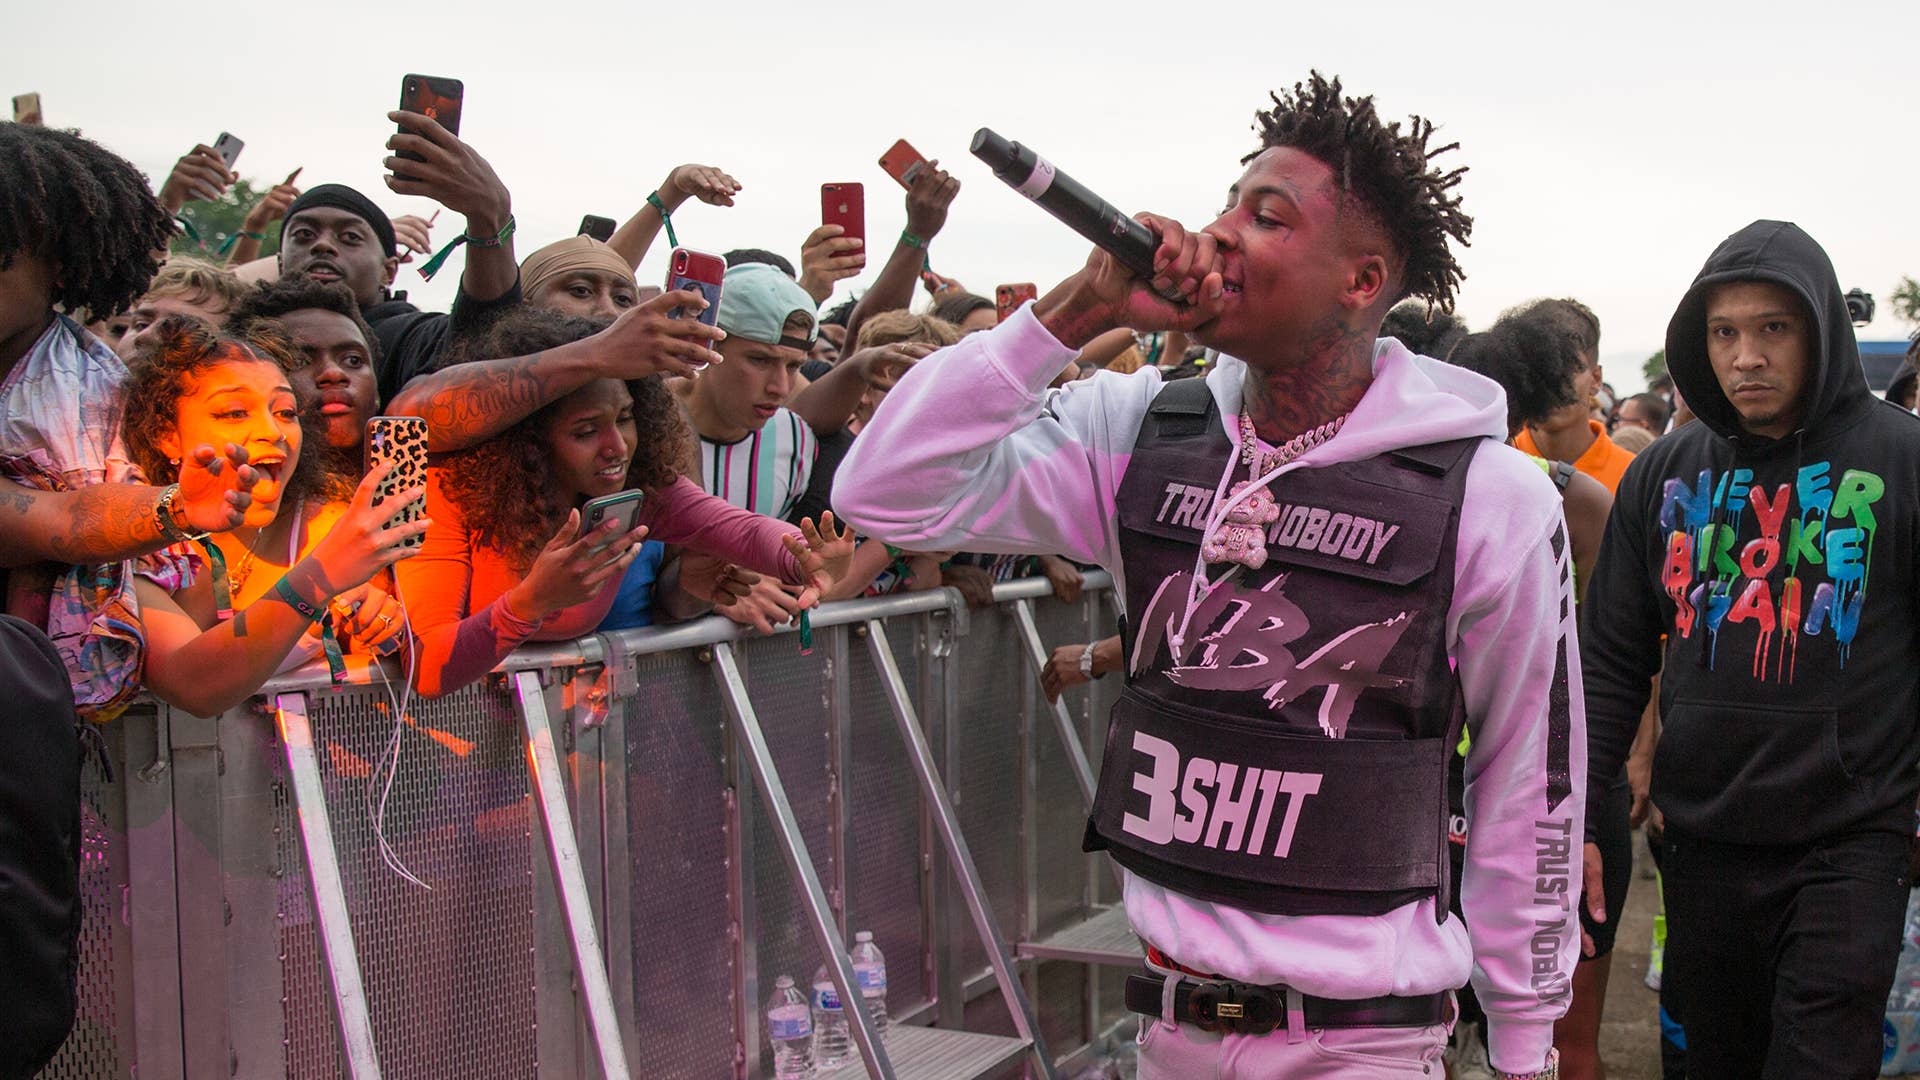 Rapper YoungBoy Never Broke Again performs onstage during JMBLYA at Fair Park